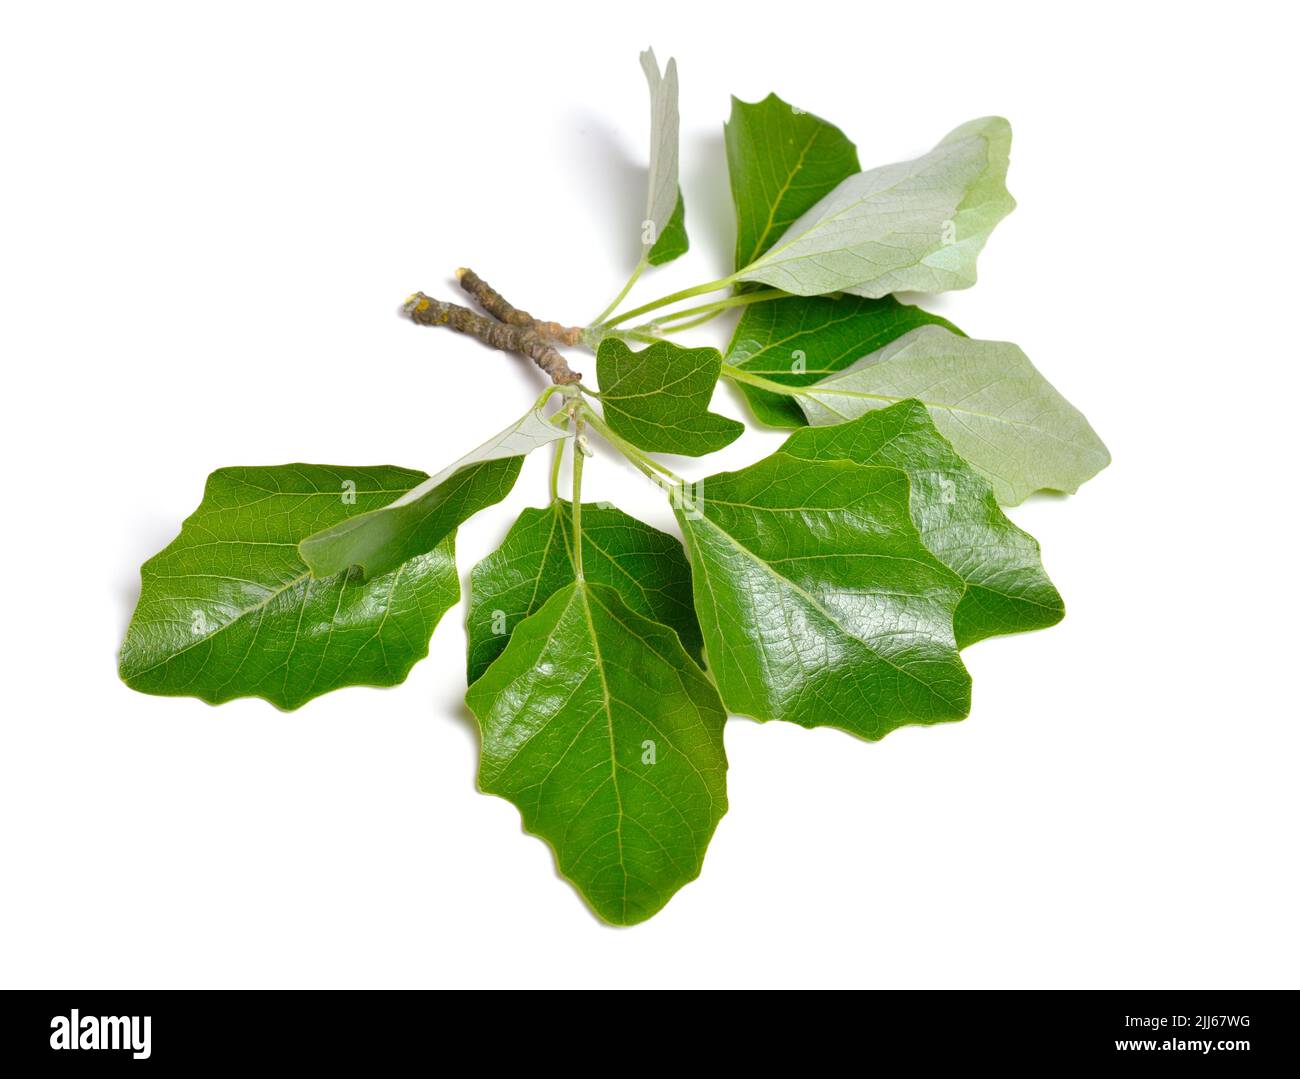 Populus alba, commonly called silver poplar, silverleaf poplar, or white poplar. Isolated on white background. Stock Photo